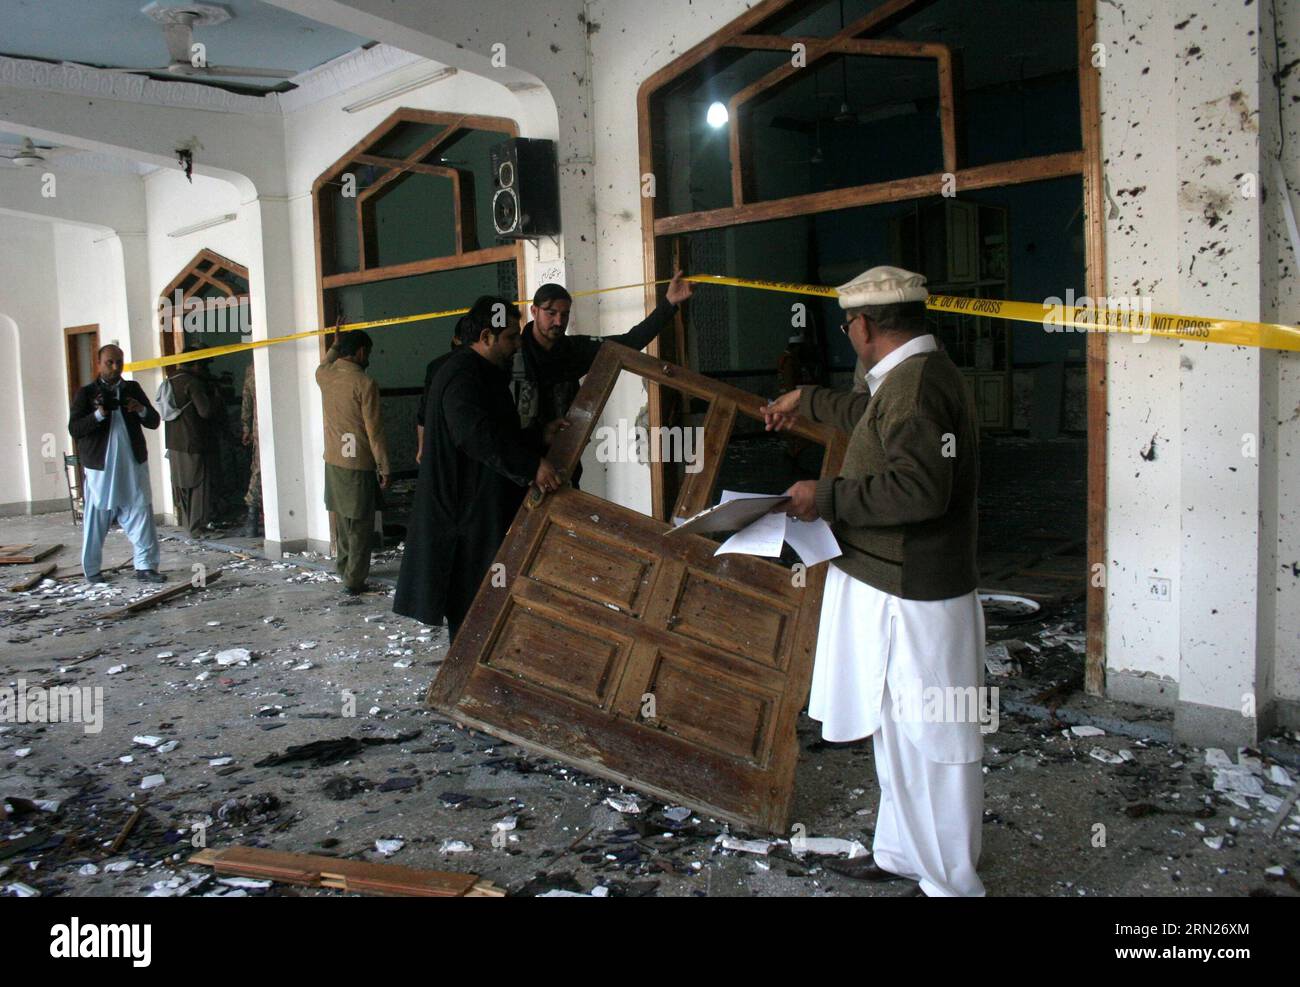 (150213) -- PESHAWAR, Feb. 13, 2015 -- Pakistani security officials inspect the suicide blast site in northwest Pakistan s Peshawar on Feb. 13, 2015. At least 19 people were killed and over 40 others injured in a twin suicide attack at a mosque of Shia Muslims in Pakistan s northwestern provincial capital of Peshawar Friday afternoon, officials said. )(bxq) PAKISTAN-PESHAWAR-SUICIDE-BLAST AhmadxSidique PUBLICATIONxNOTxINxCHN   Peshawar Feb 13 2015 Pakistani Security Officials inspect The Suicide Blast Site in Northwest Pakistan S Peshawar ON Feb 13 2015 AT least 19 Celebrities Were KILLED and Stock Photo